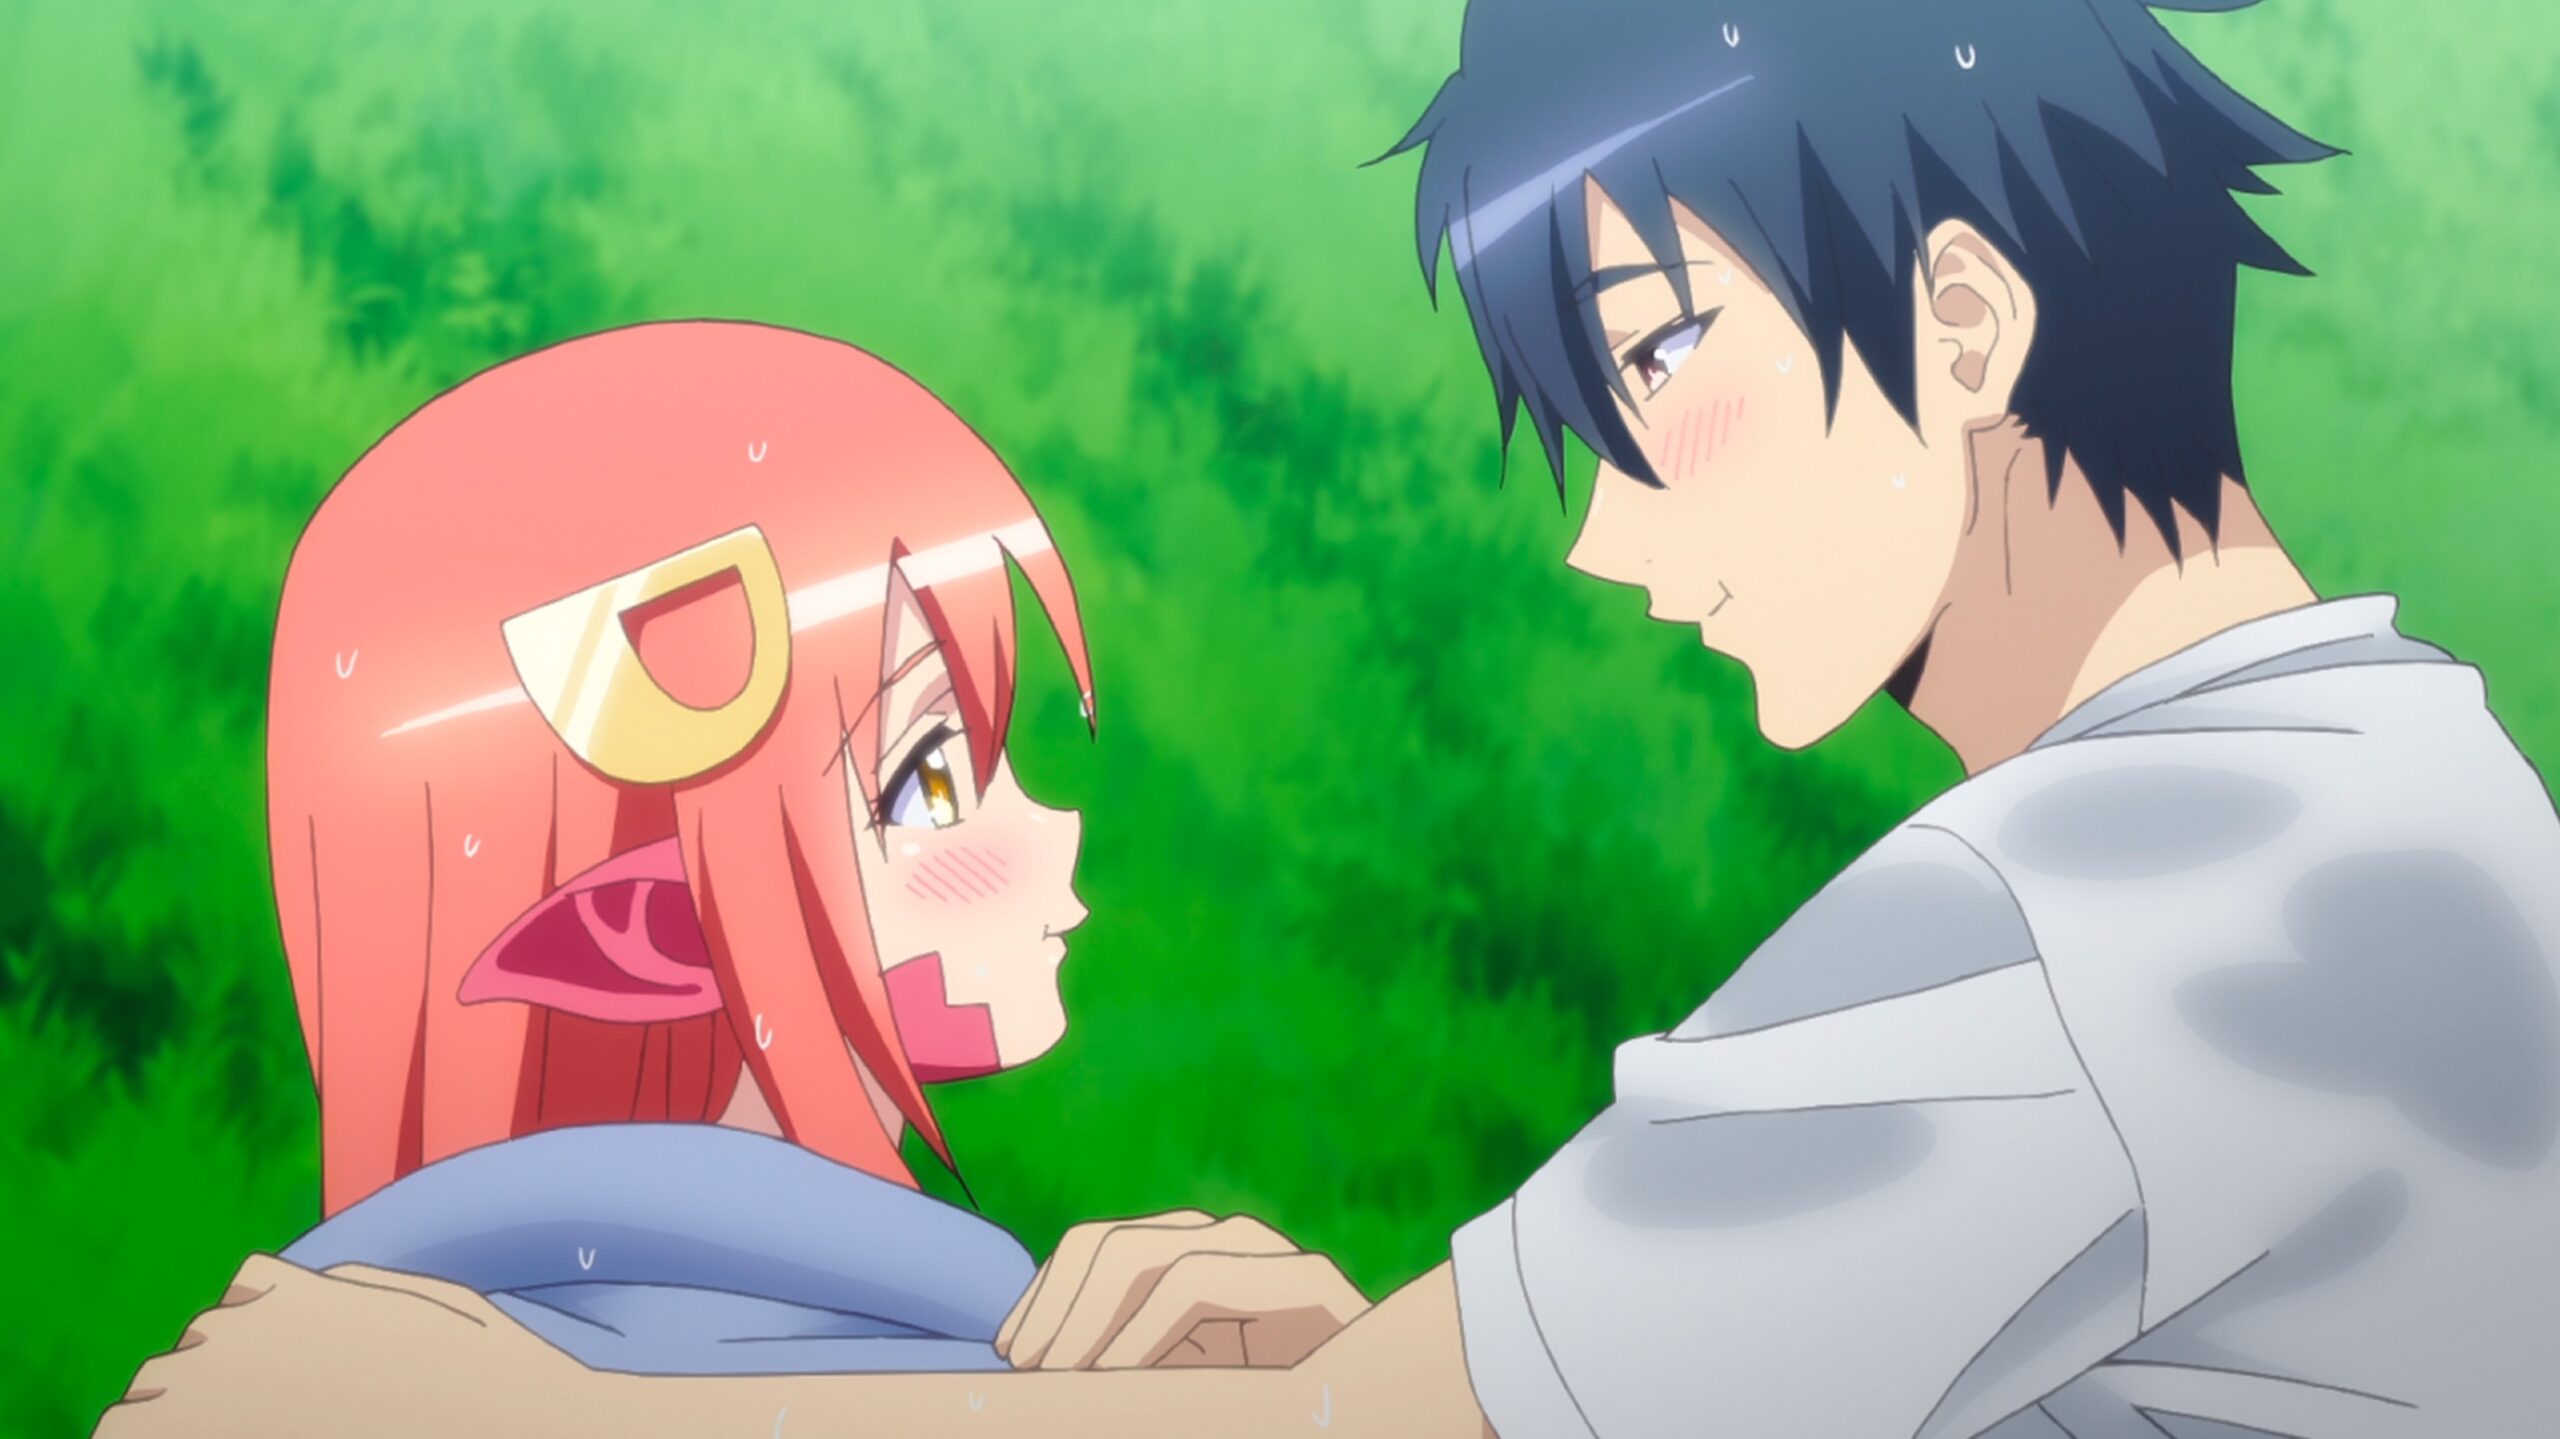 denis hunter recommends Monster Musume Ep 9